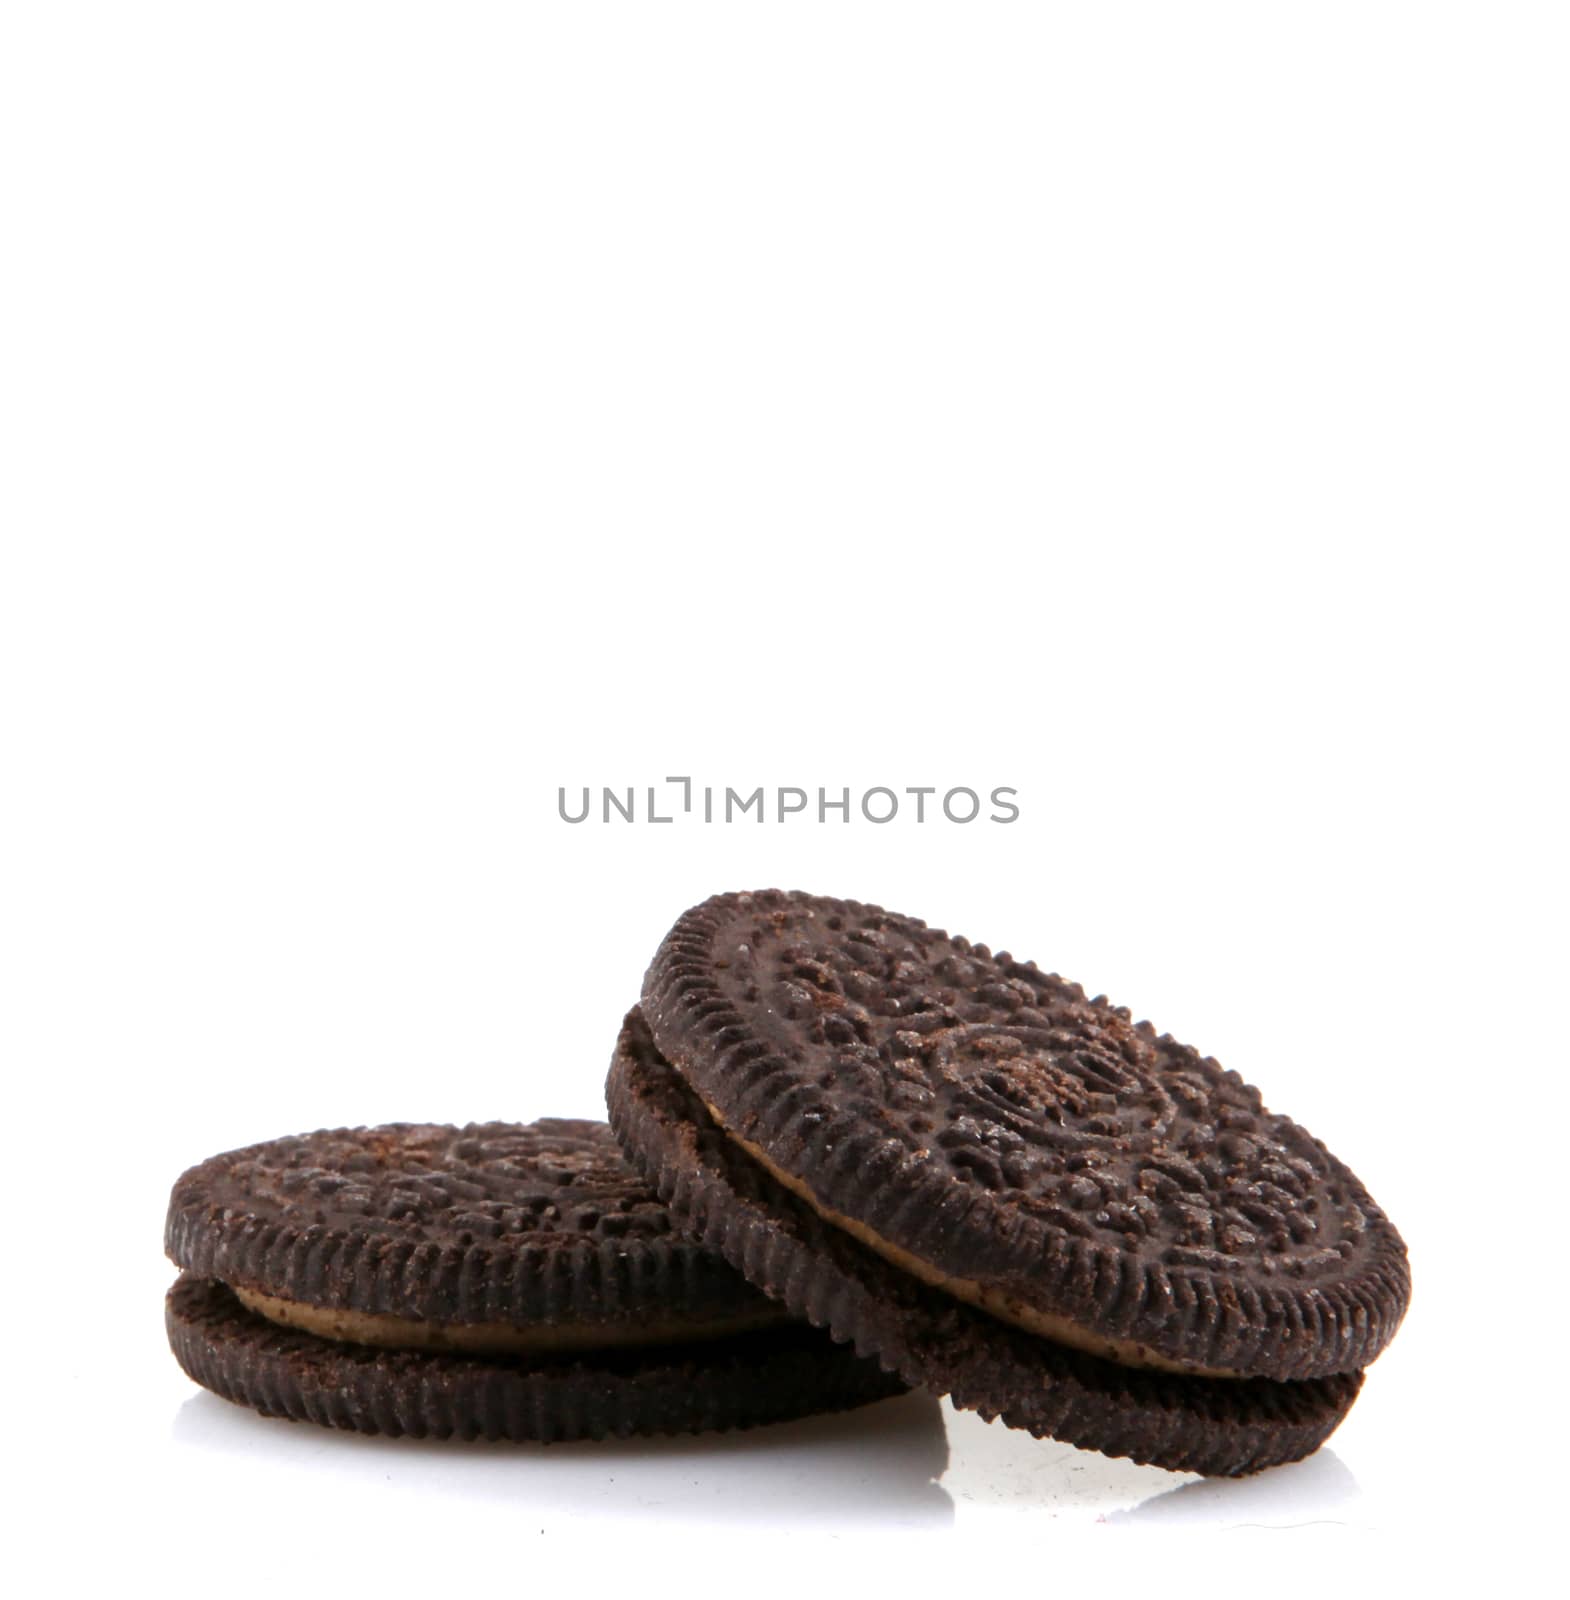 AYTOS, BULGARIA - APRIL 03, 2016: Oreo isolated on white background. Oreo is a sandwich cookie consisting of two chocolate disks with a sweet cream filling in between. by nenov